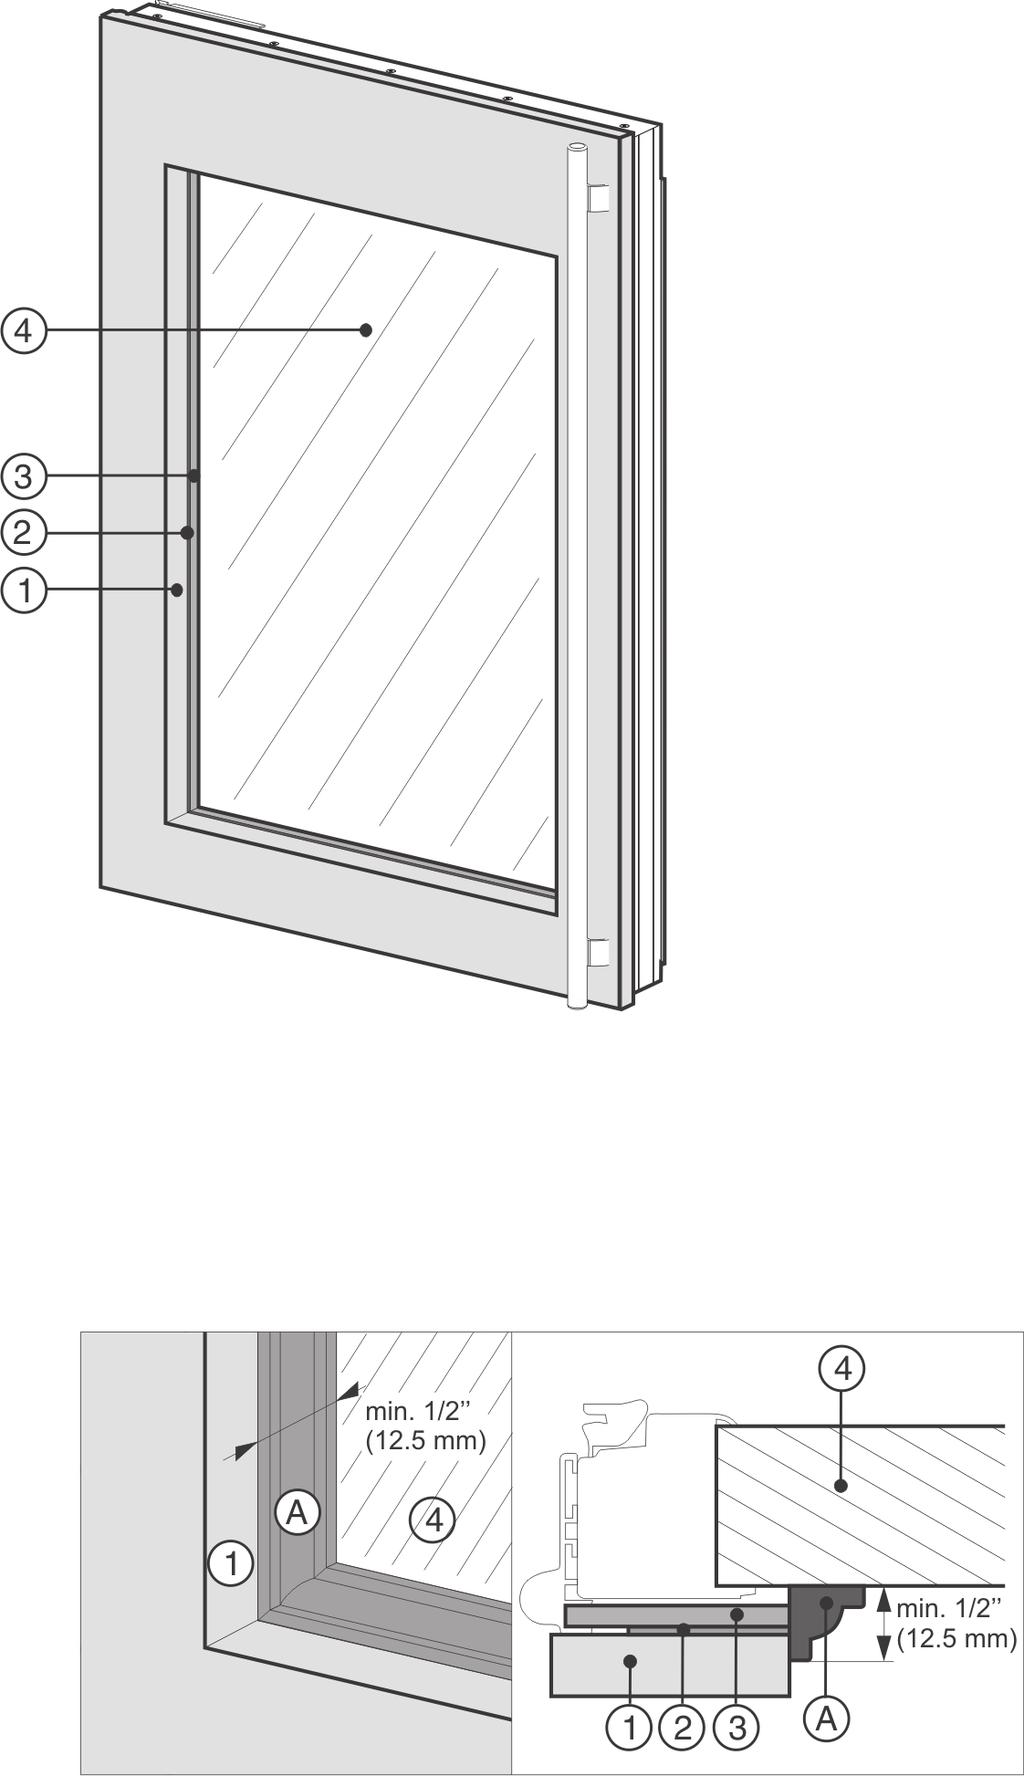 Cut-out for glass window WFI1061 The edges of the panels 1,2,3 are visible at the transition to the glass window 4.